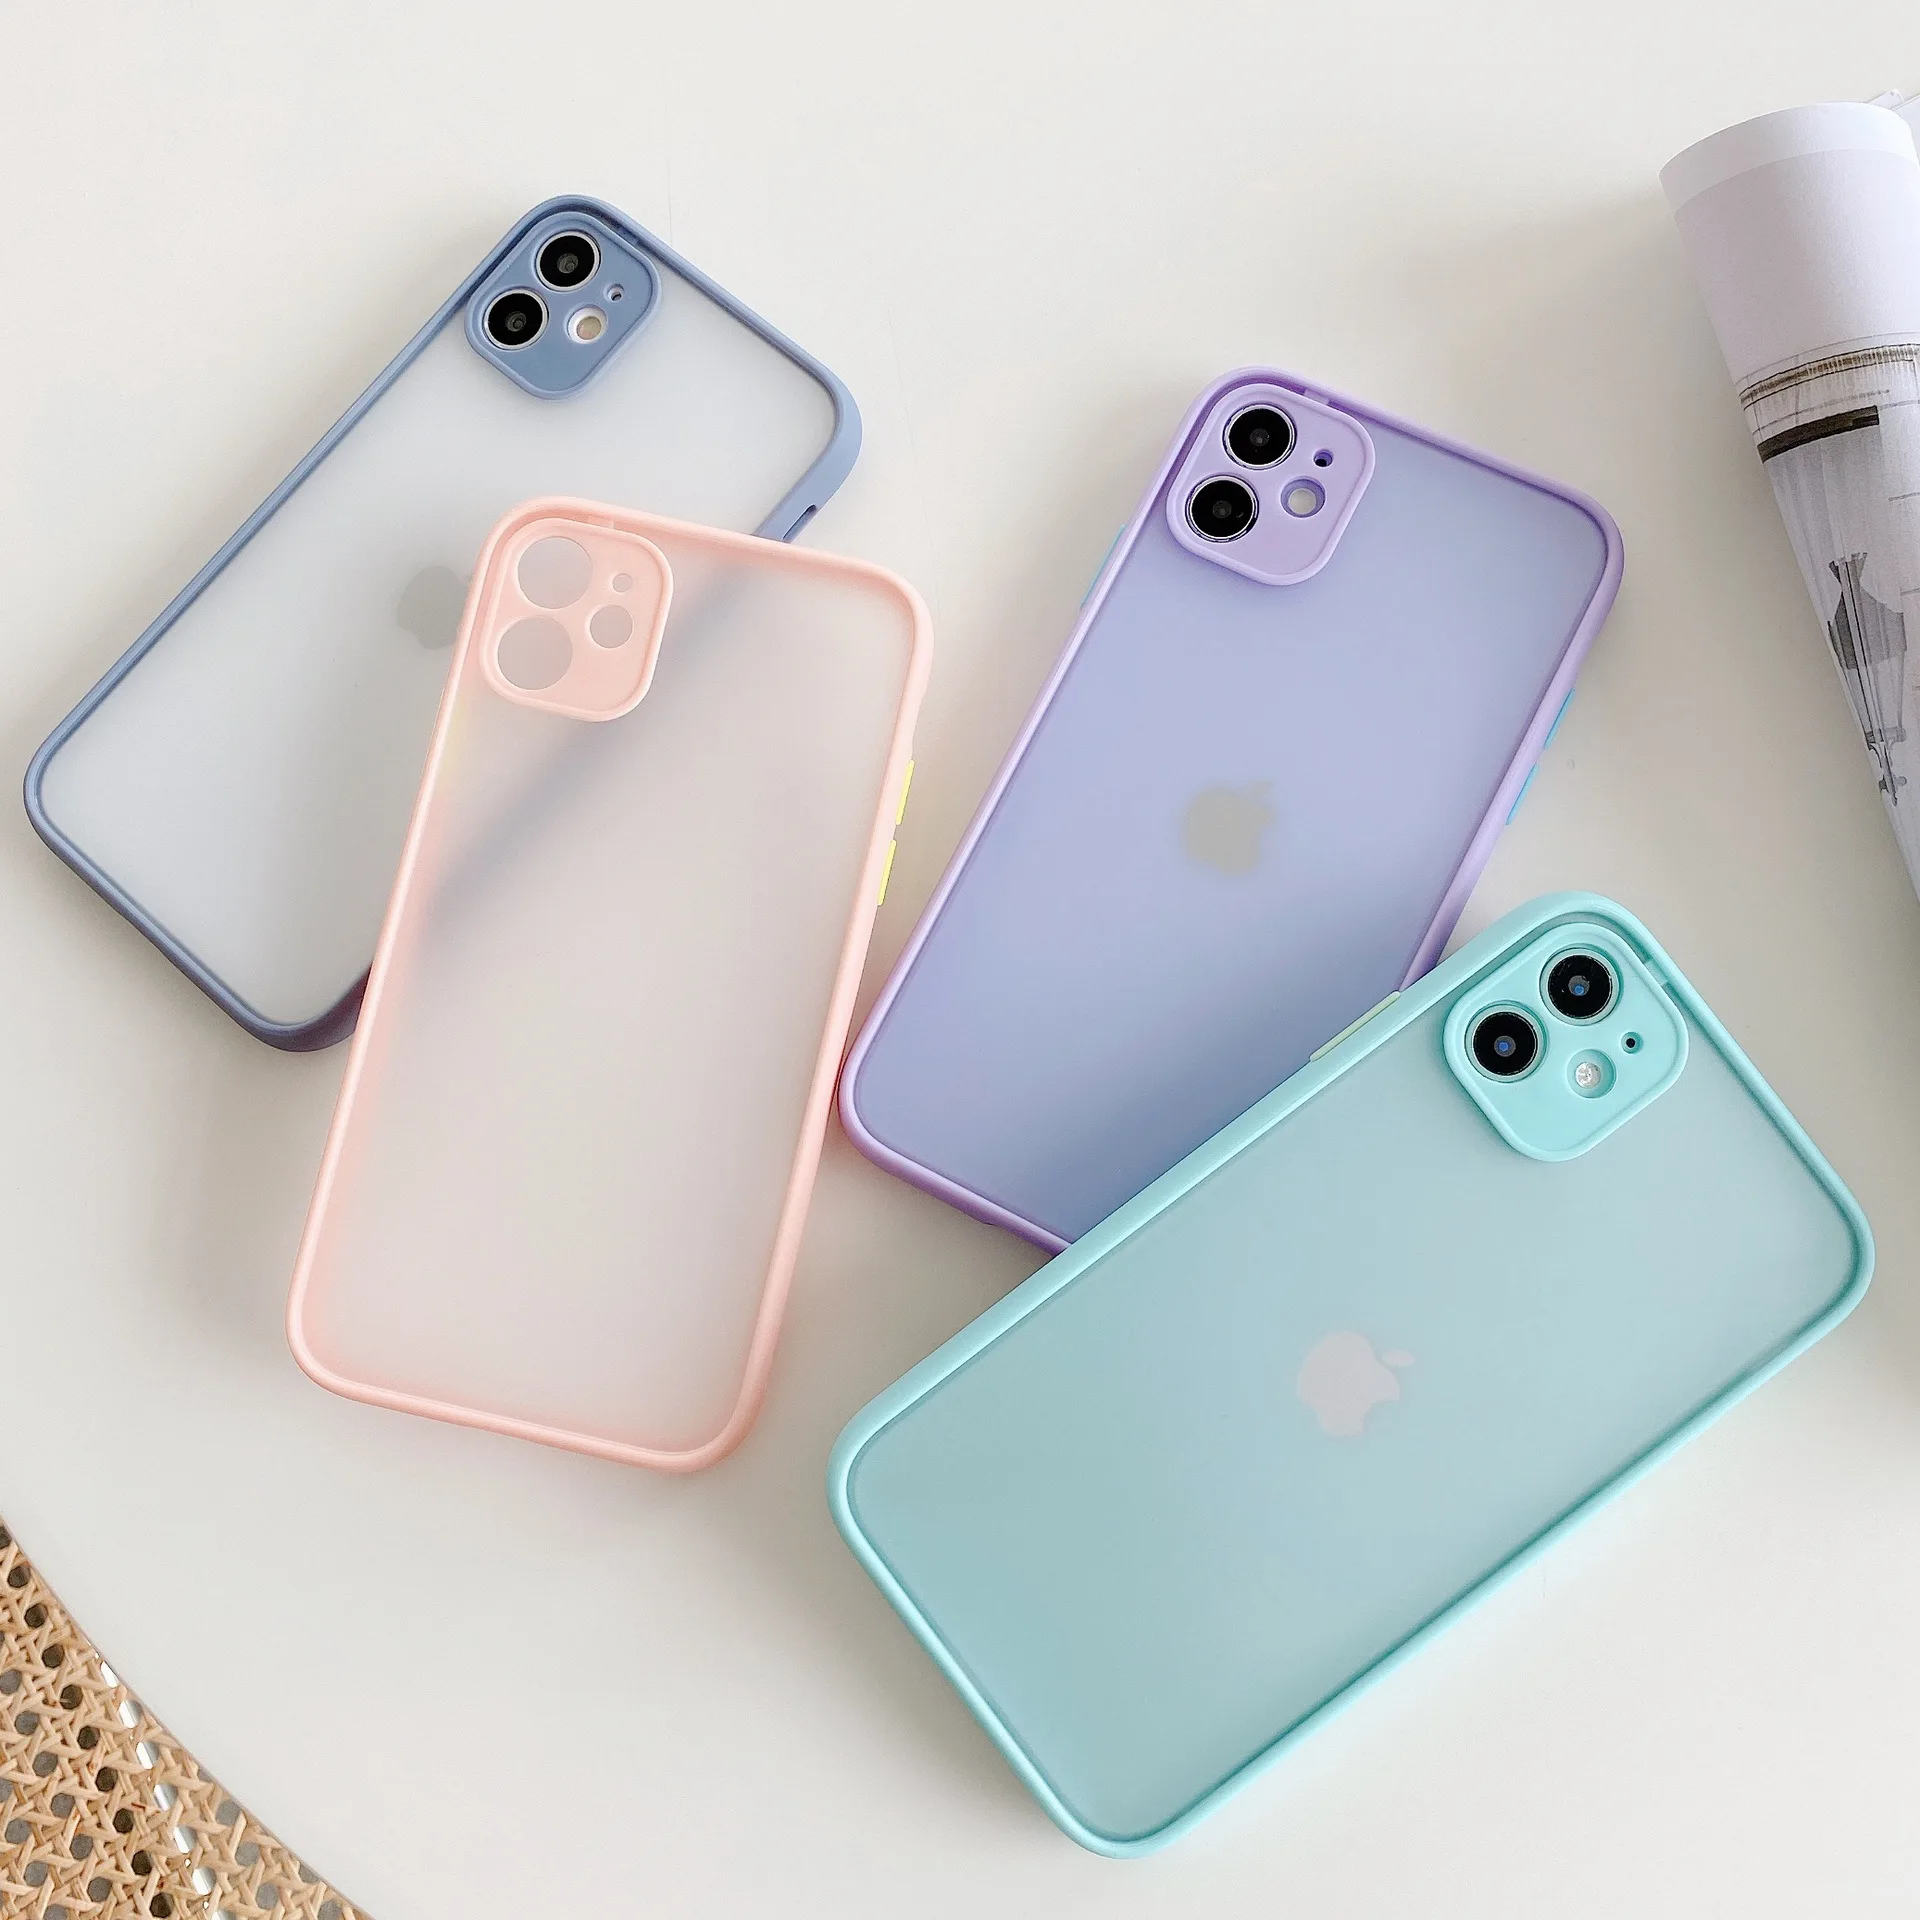 

Mint Hybrid Simple Matte Bumper Phone Case For iPhone 11 12 13 Pro XR XS Max X 6S 8 7 Plus SE2020 Shockproof Soft Silicone Cover